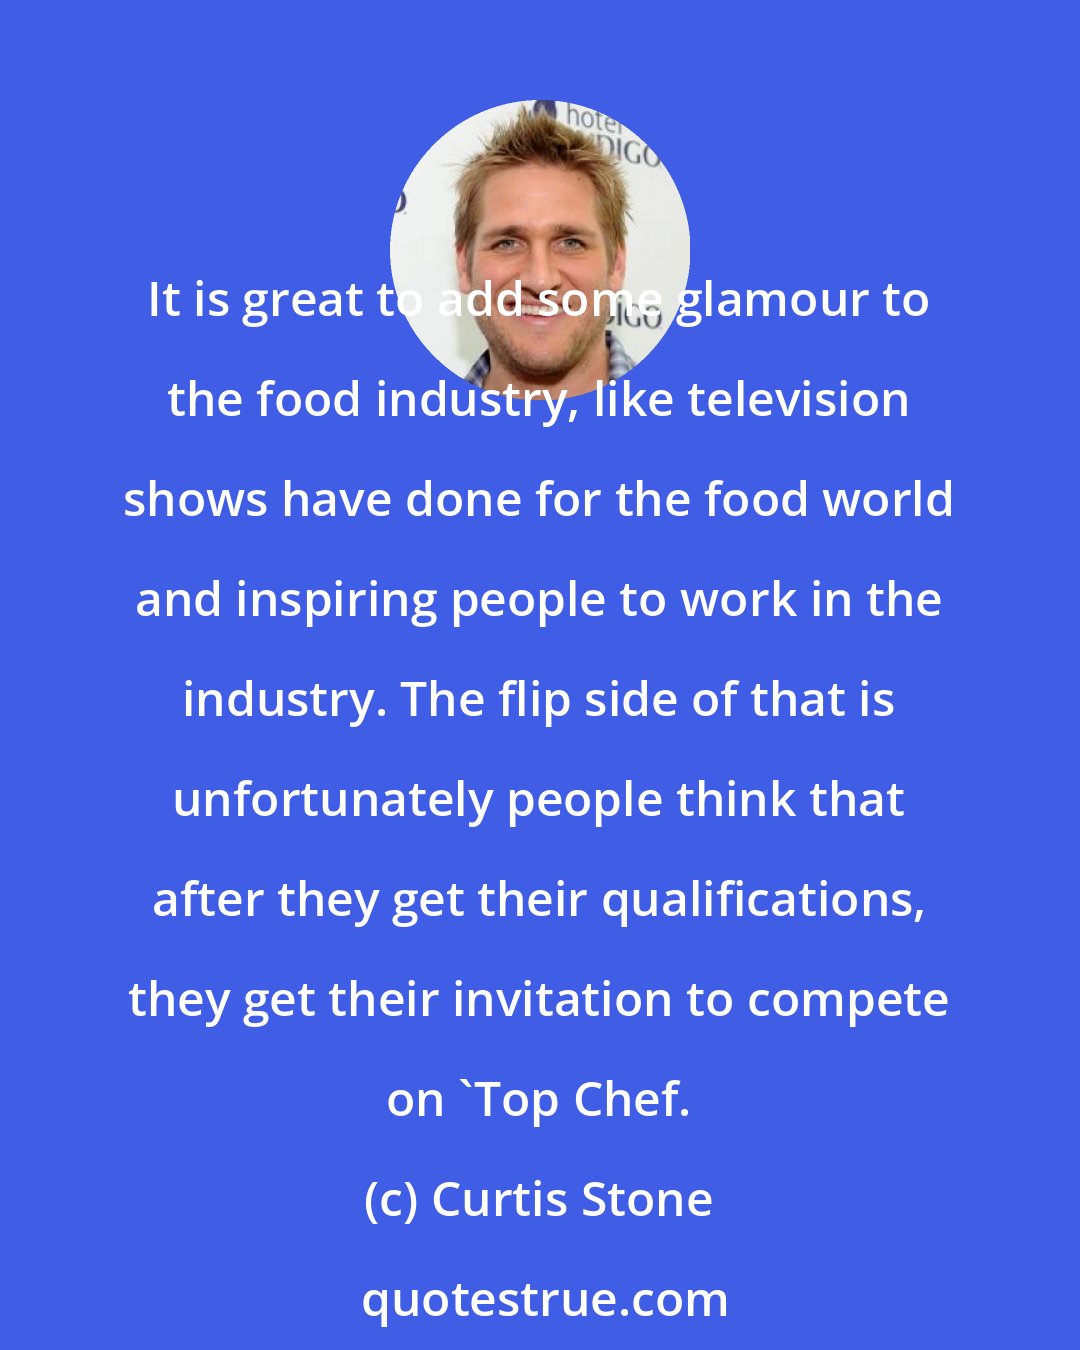 Curtis Stone: It is great to add some glamour to the food industry, like television shows have done for the food world and inspiring people to work in the industry. The flip side of that is unfortunately people think that after they get their qualifications, they get their invitation to compete on 'Top Chef.